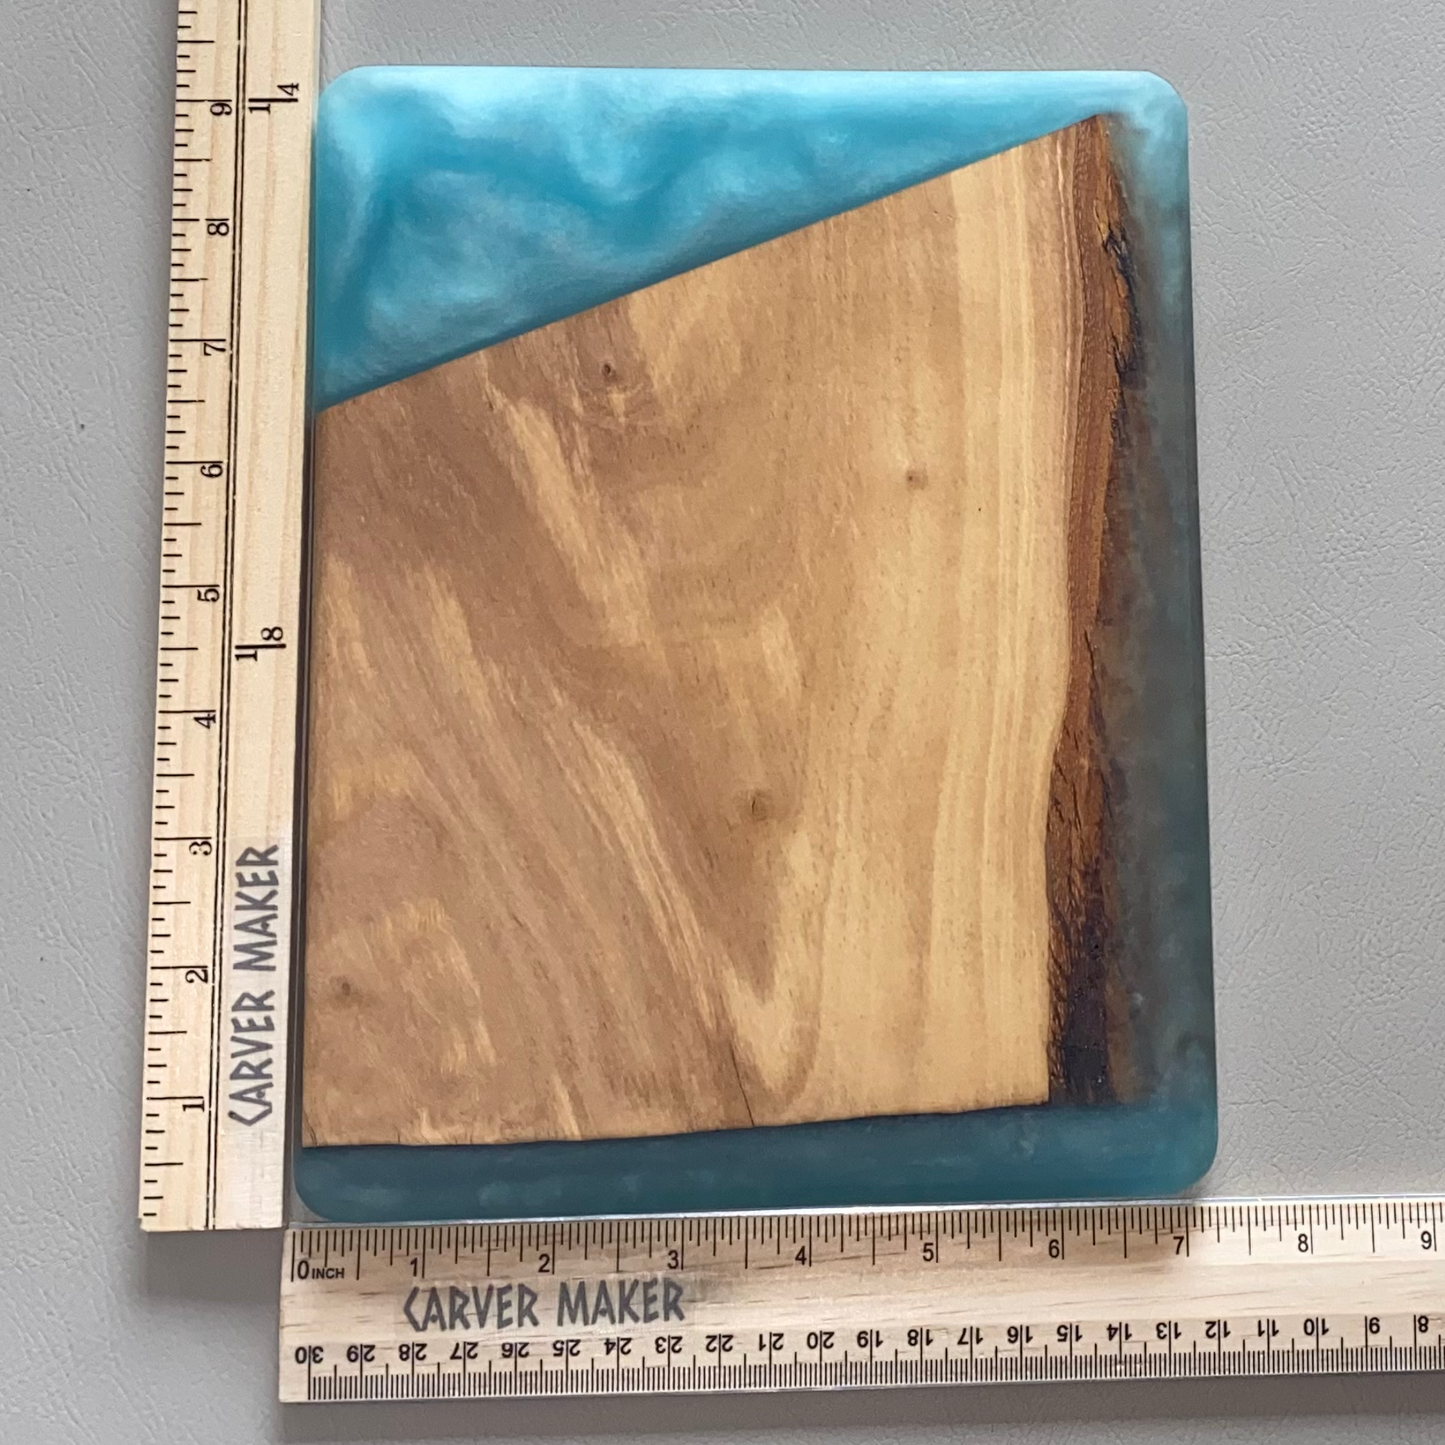 Olive Wood and Turquoise Resin Butter Board